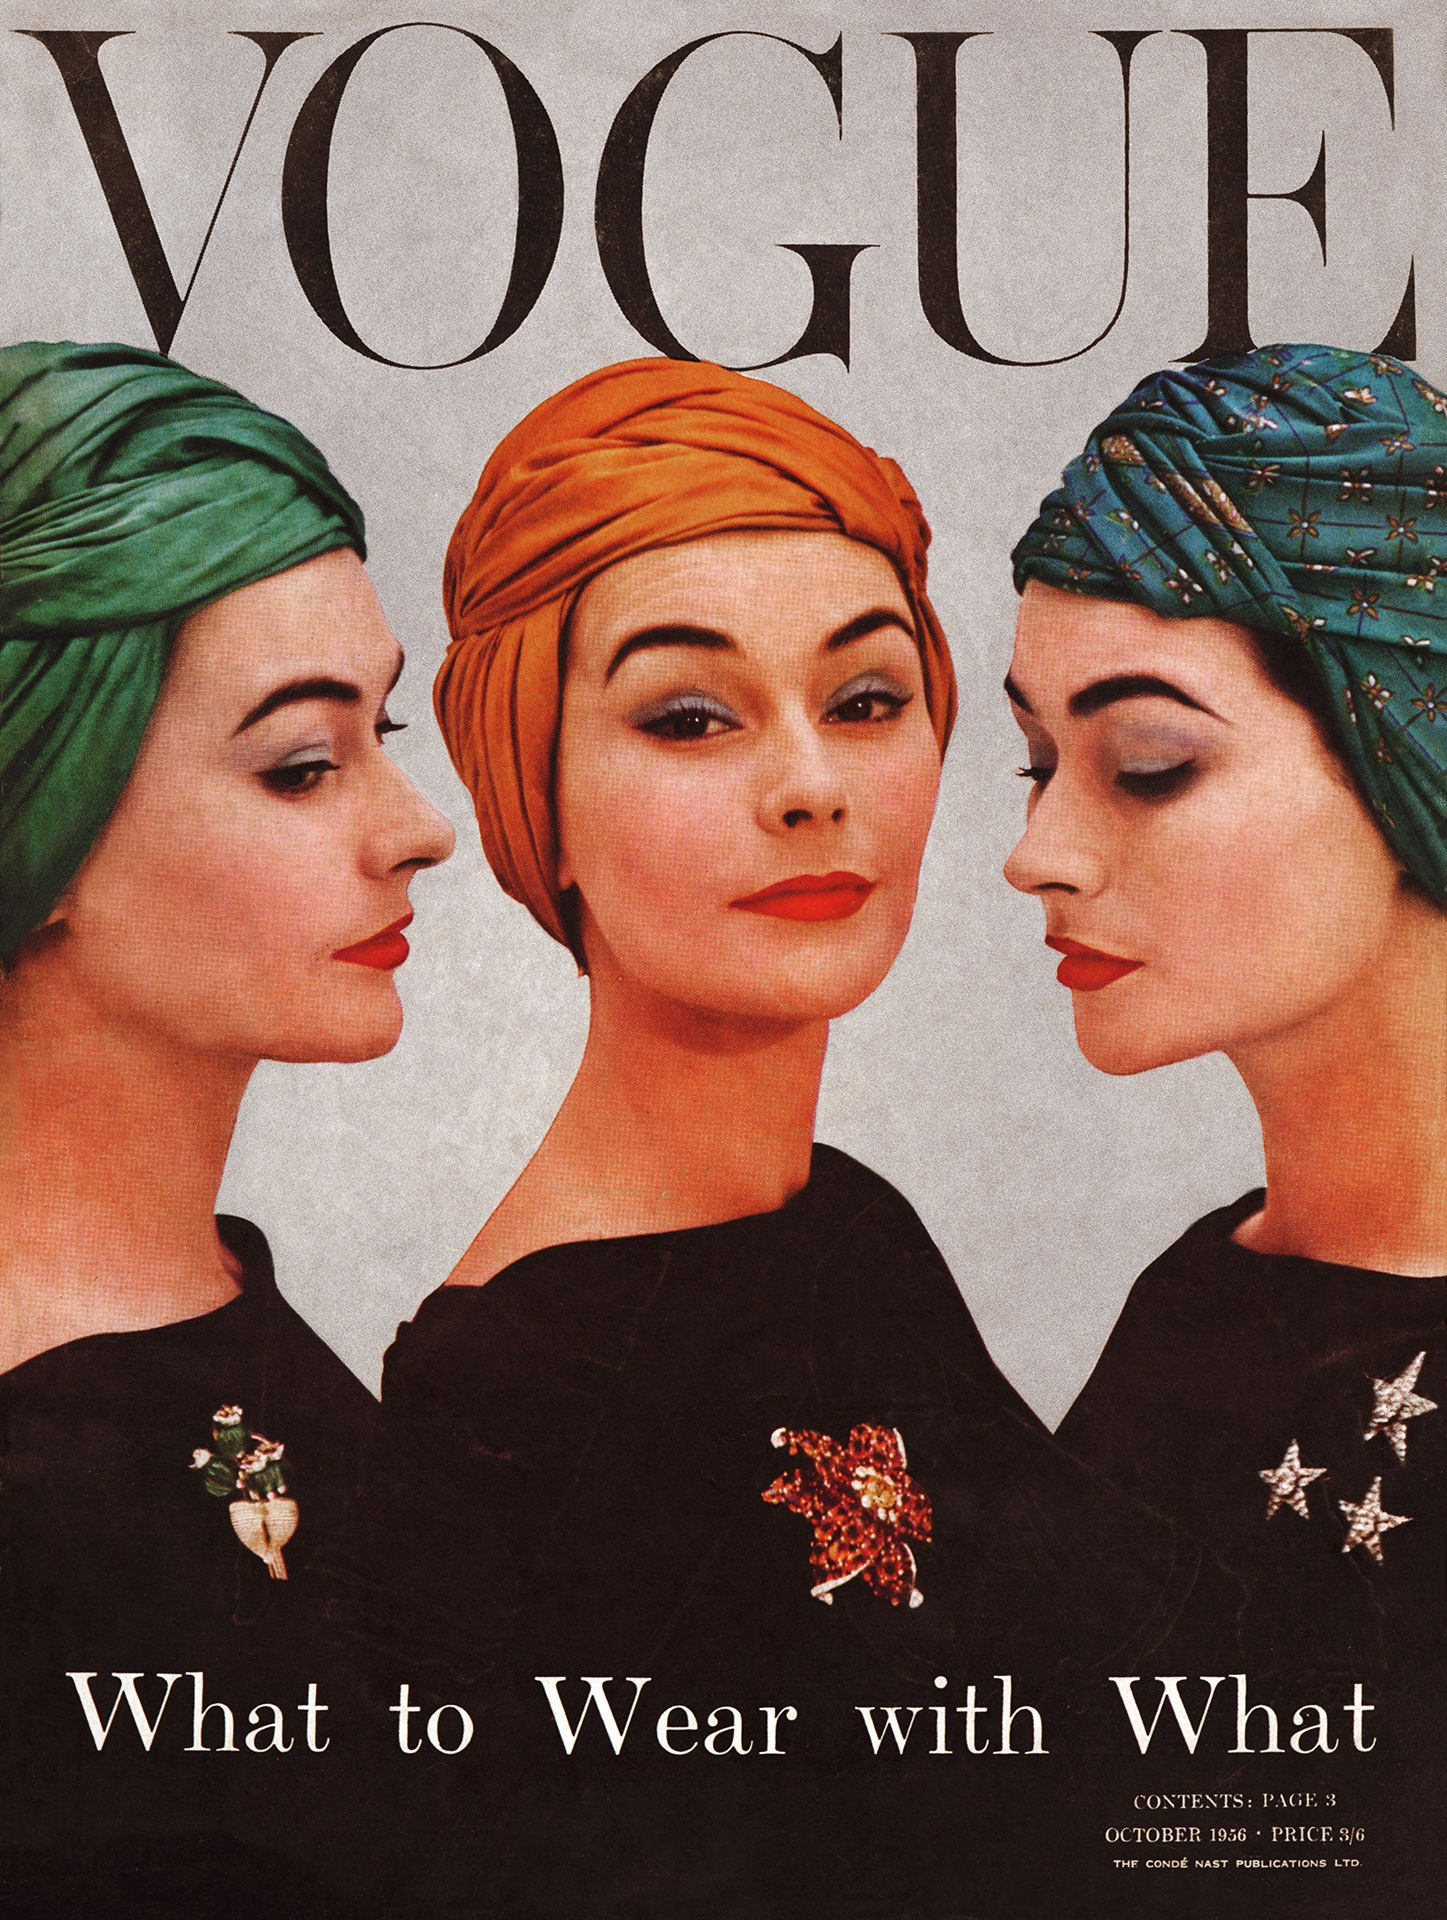 1956 Vogue cover featuring models in turbans